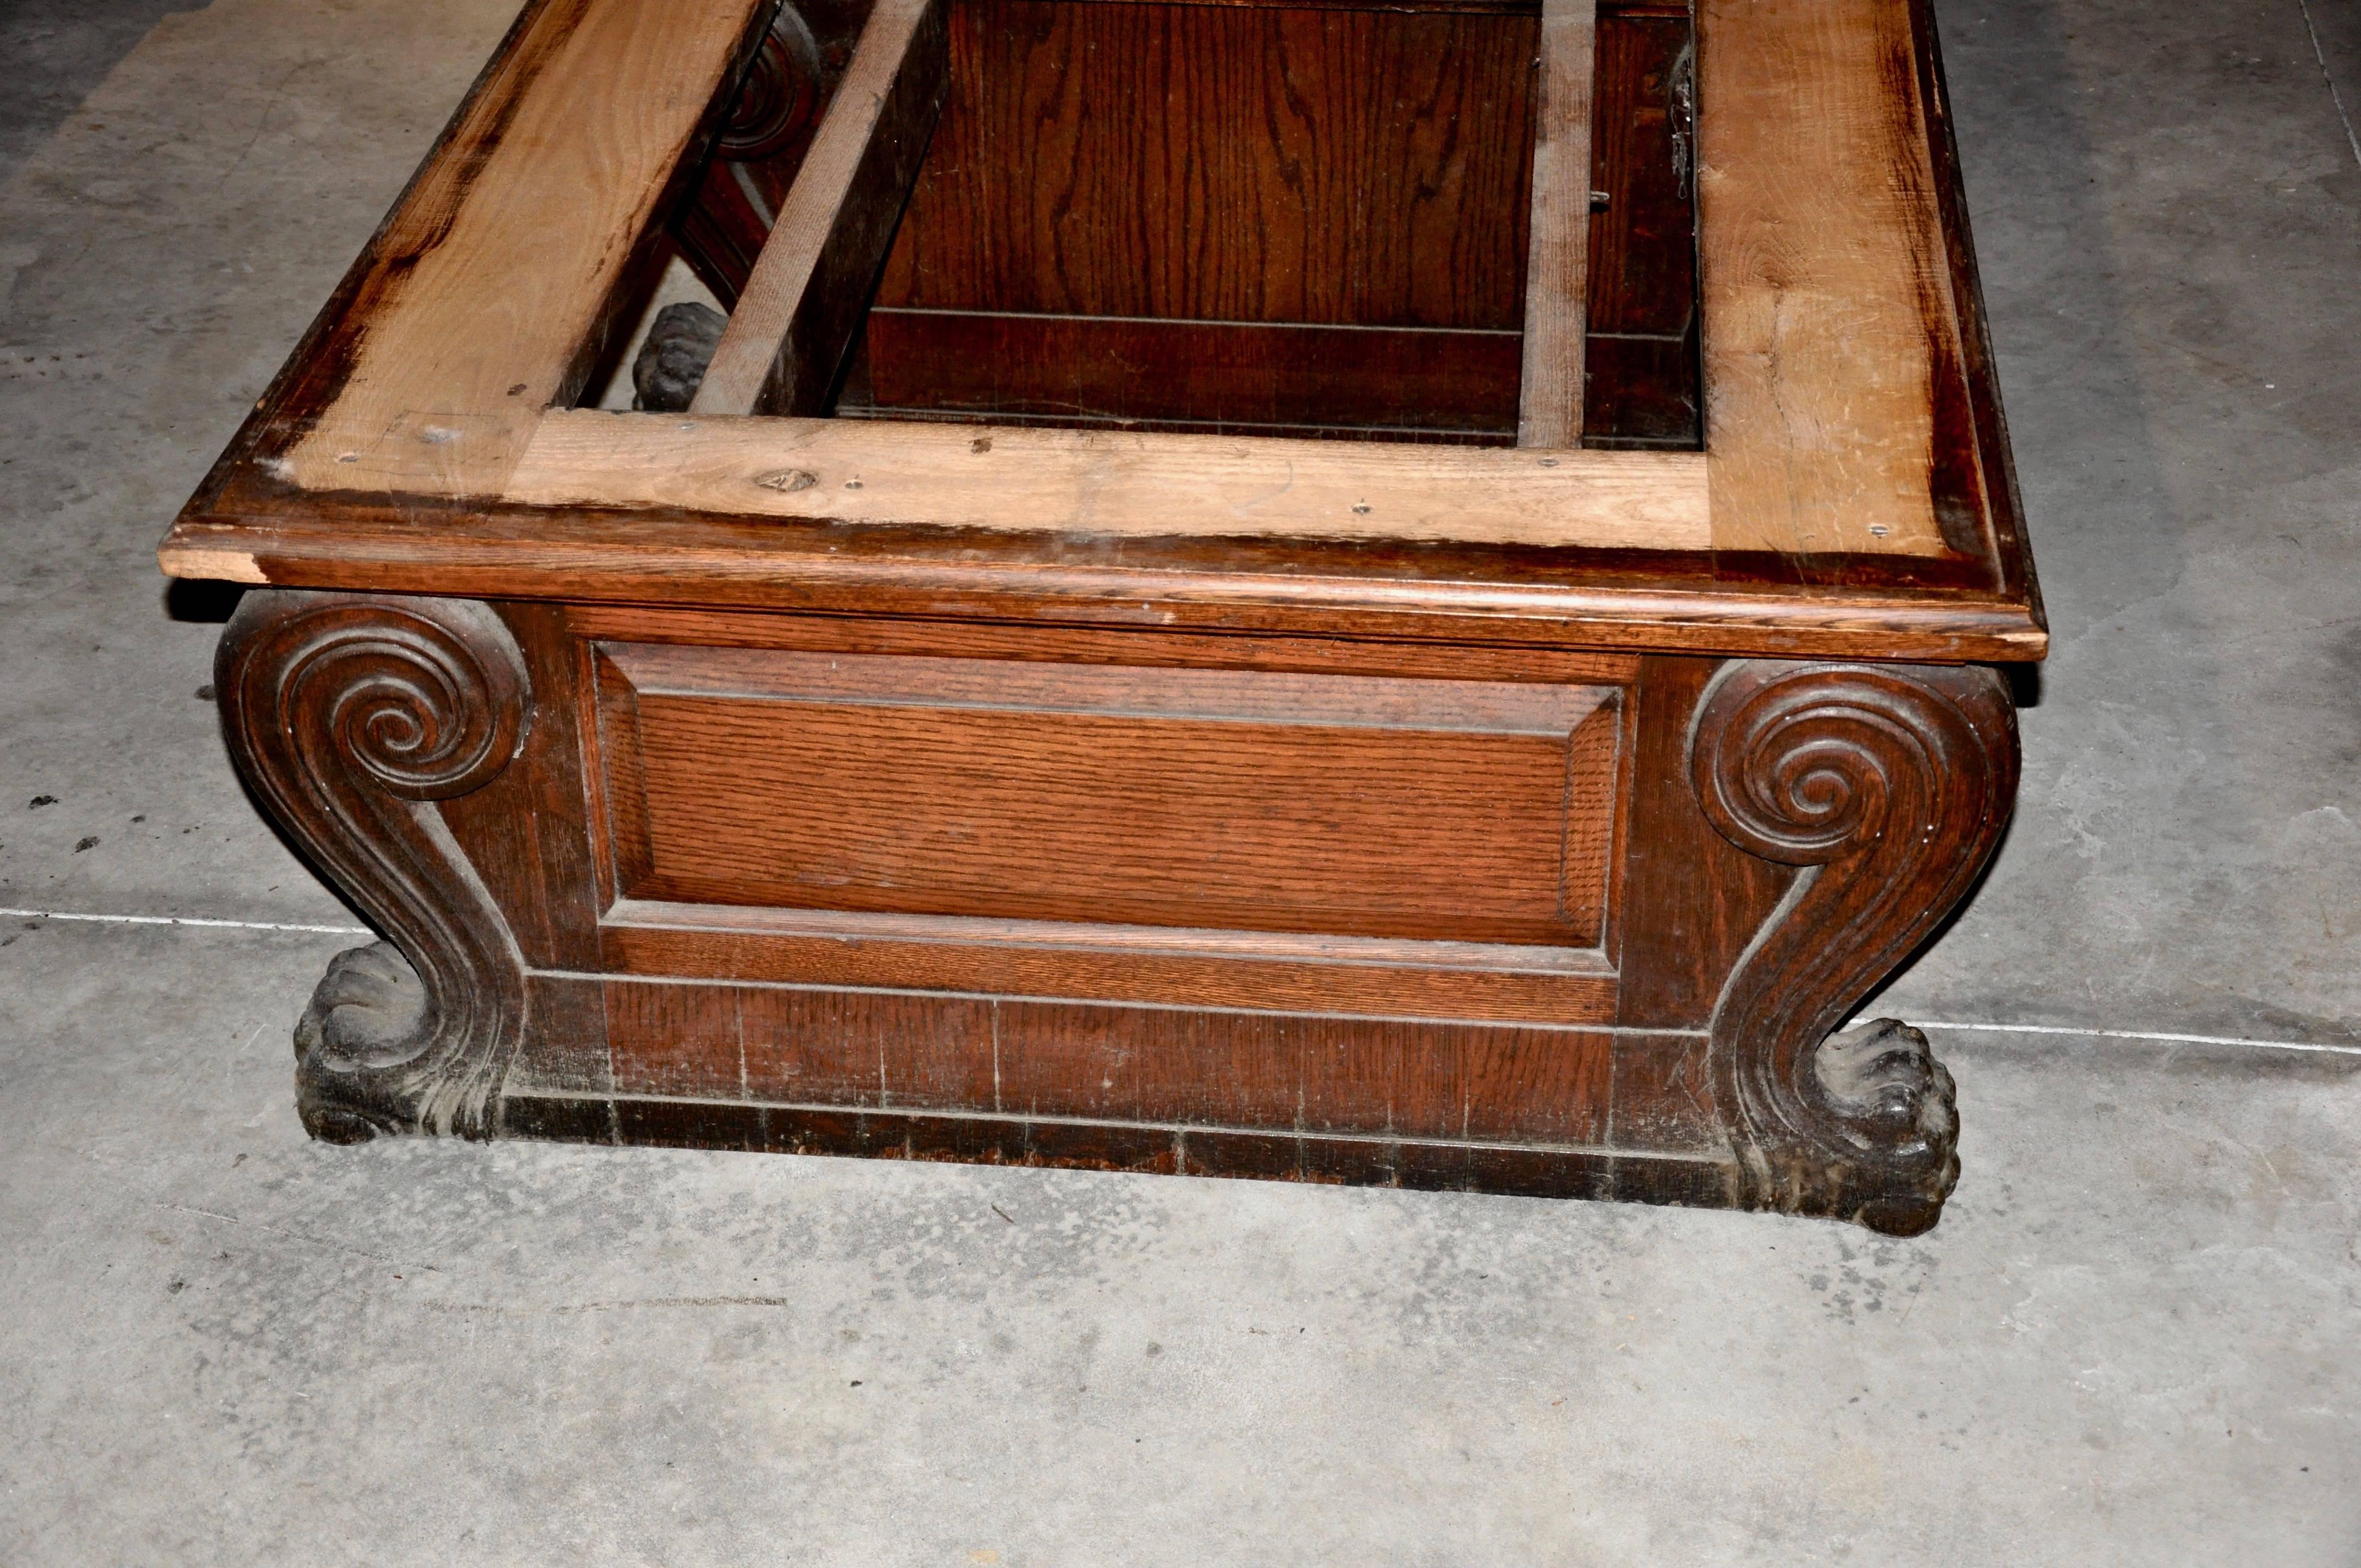 Carved Five Renaissance Revival Double Benches, Boston Public Library, 19th Century